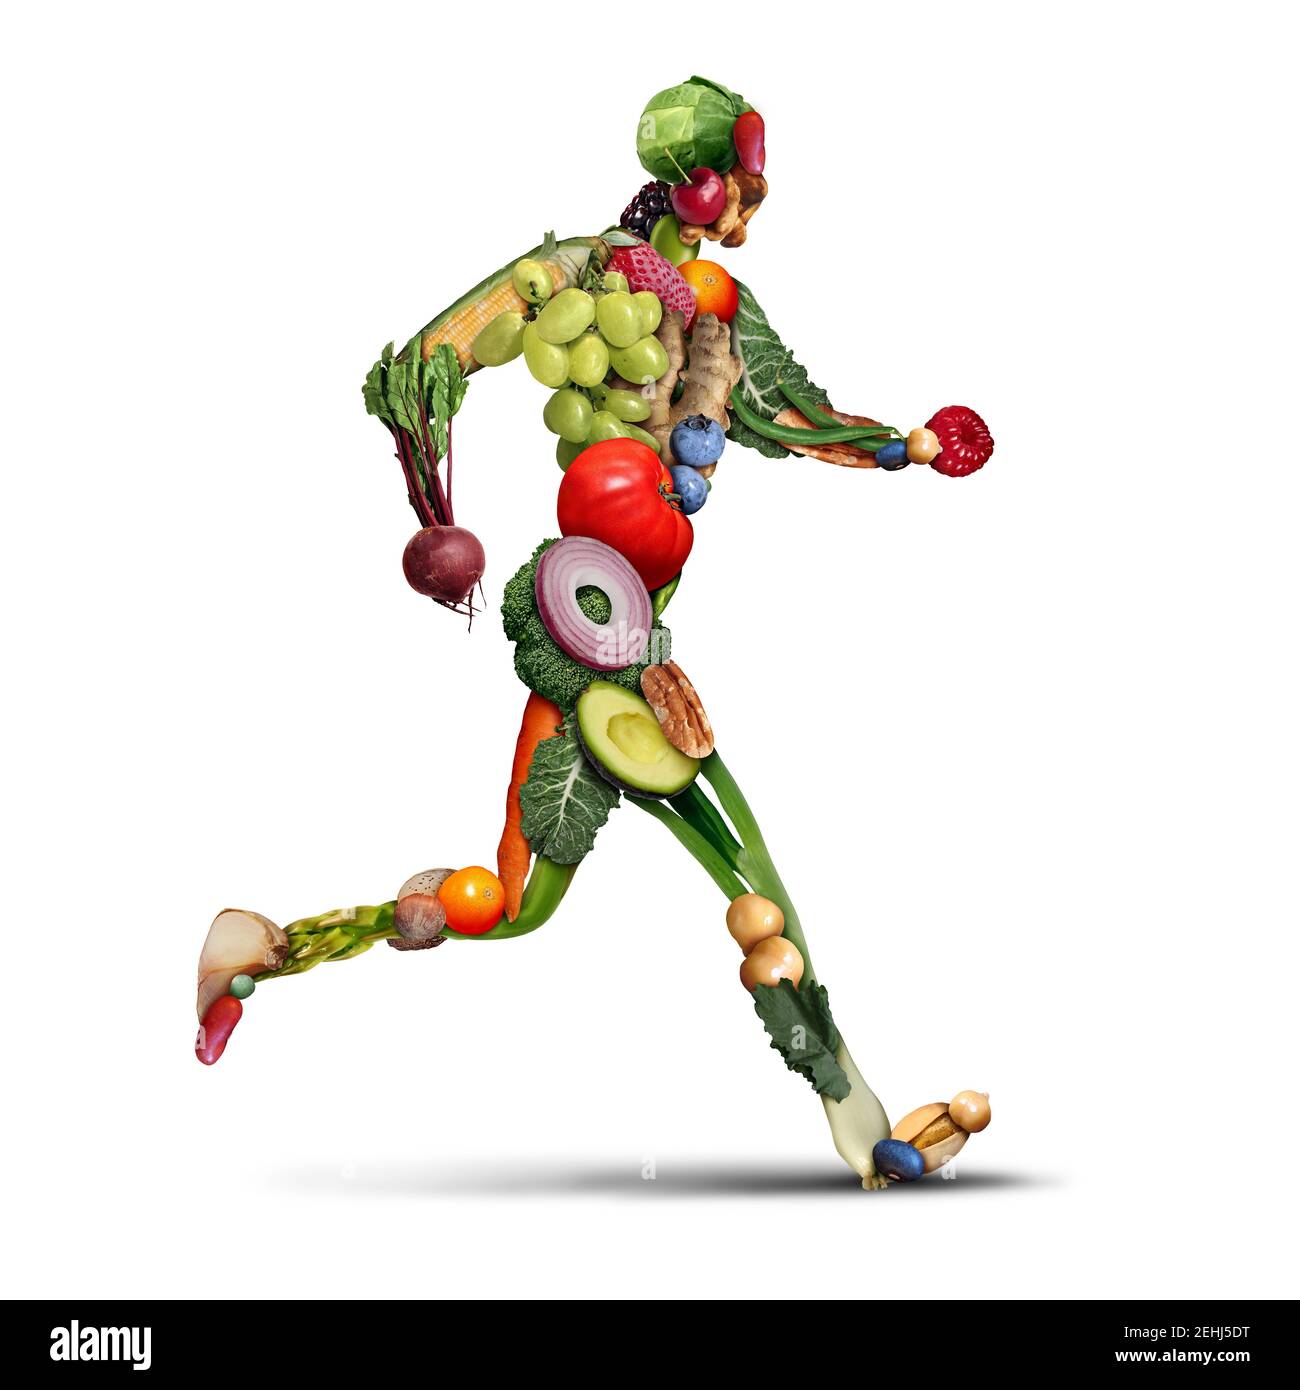 Diet and fitness as a healthy lifestyle of exercise and eating fruits and vegetables to lose weight as a person running or jogging made of fresh. Stock Photo